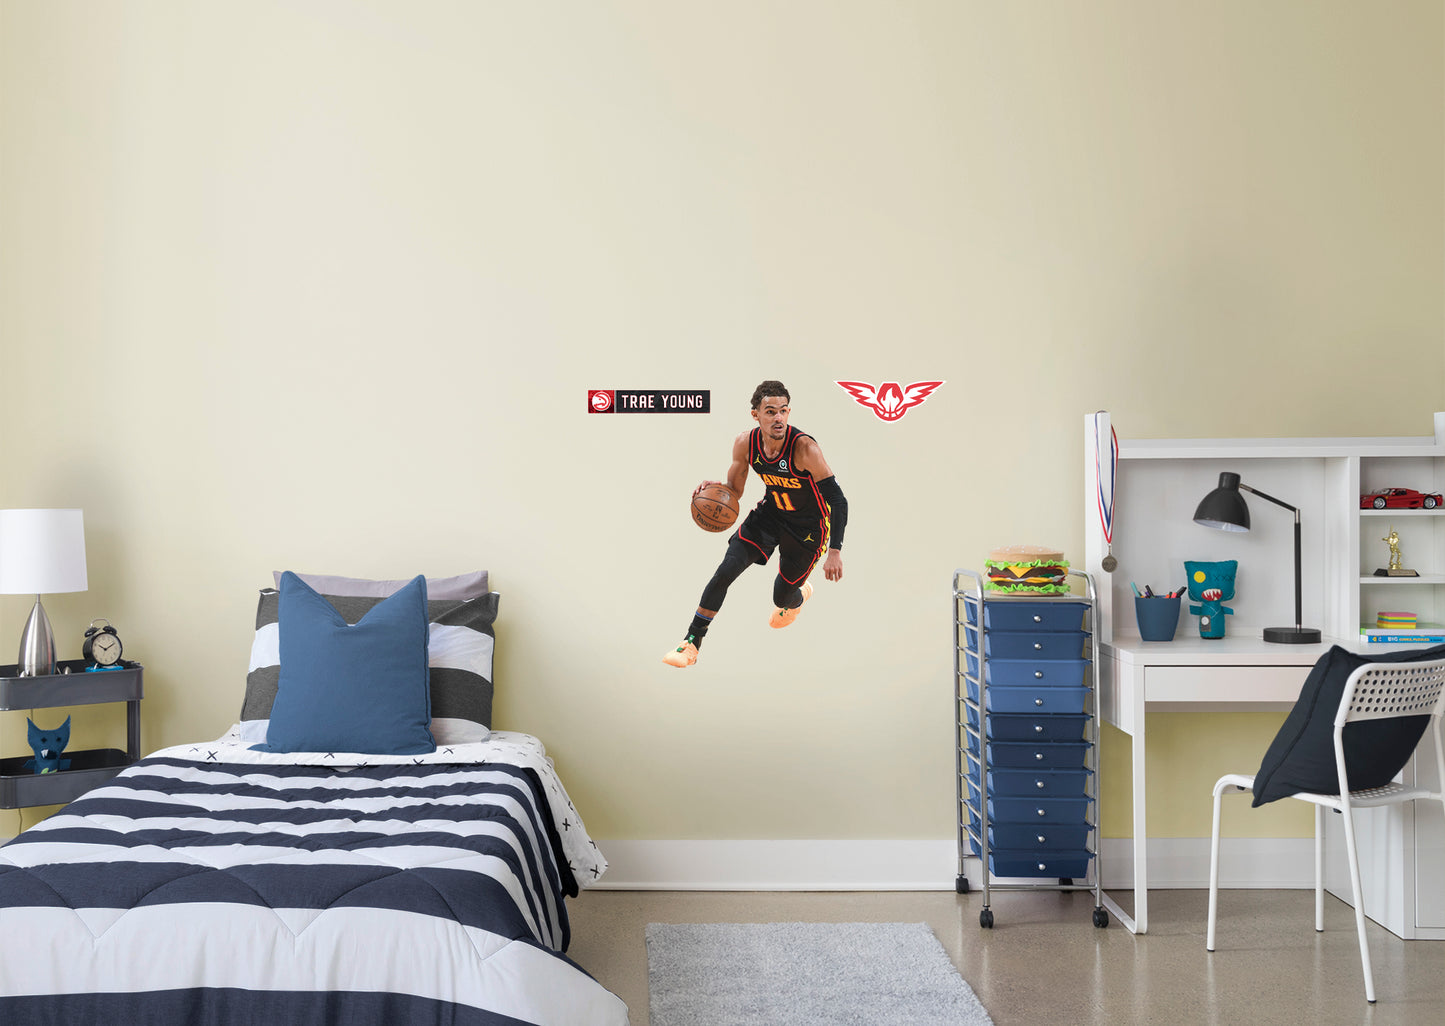 Atlanta Hawks: Trae Young  Statement        - Officially Licensed NBA Removable Wall   Adhesive Decal